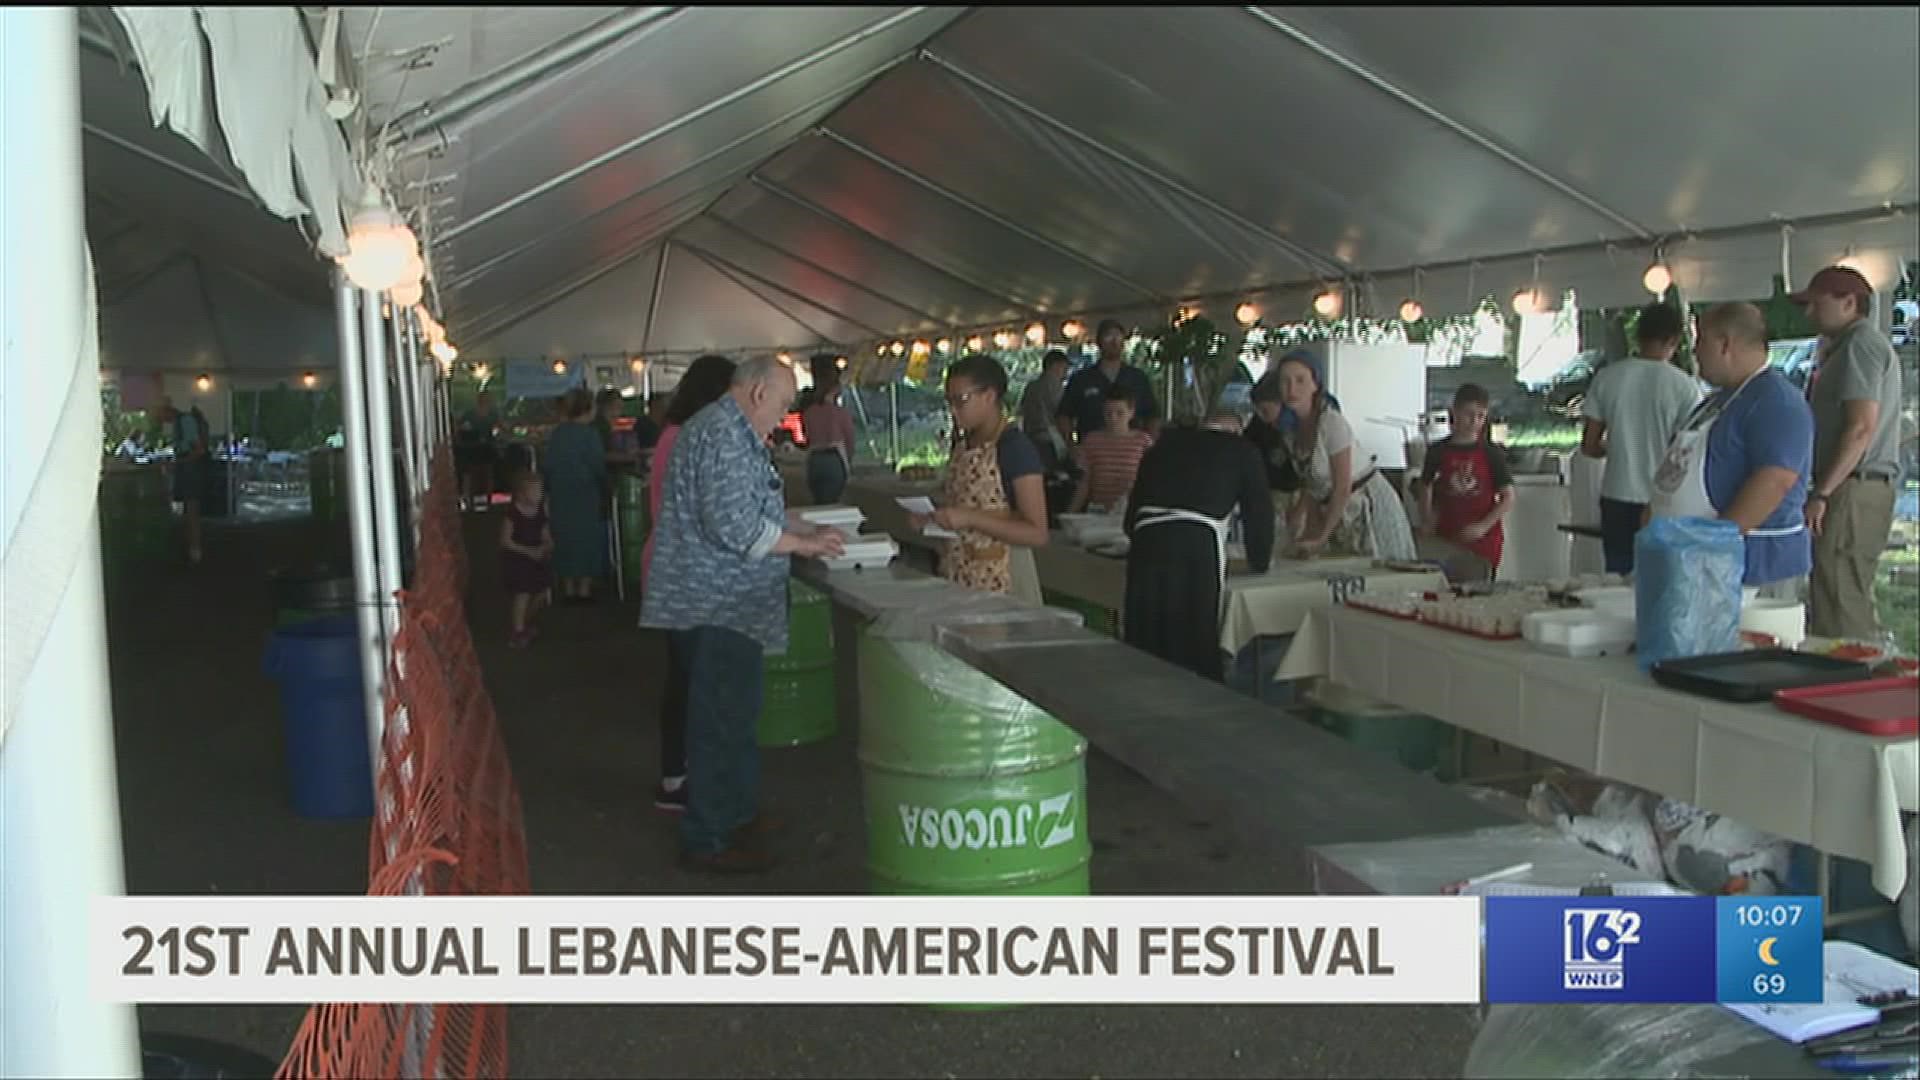 The Lebanese-American Food Festival runs through Sunday in the Electric City.